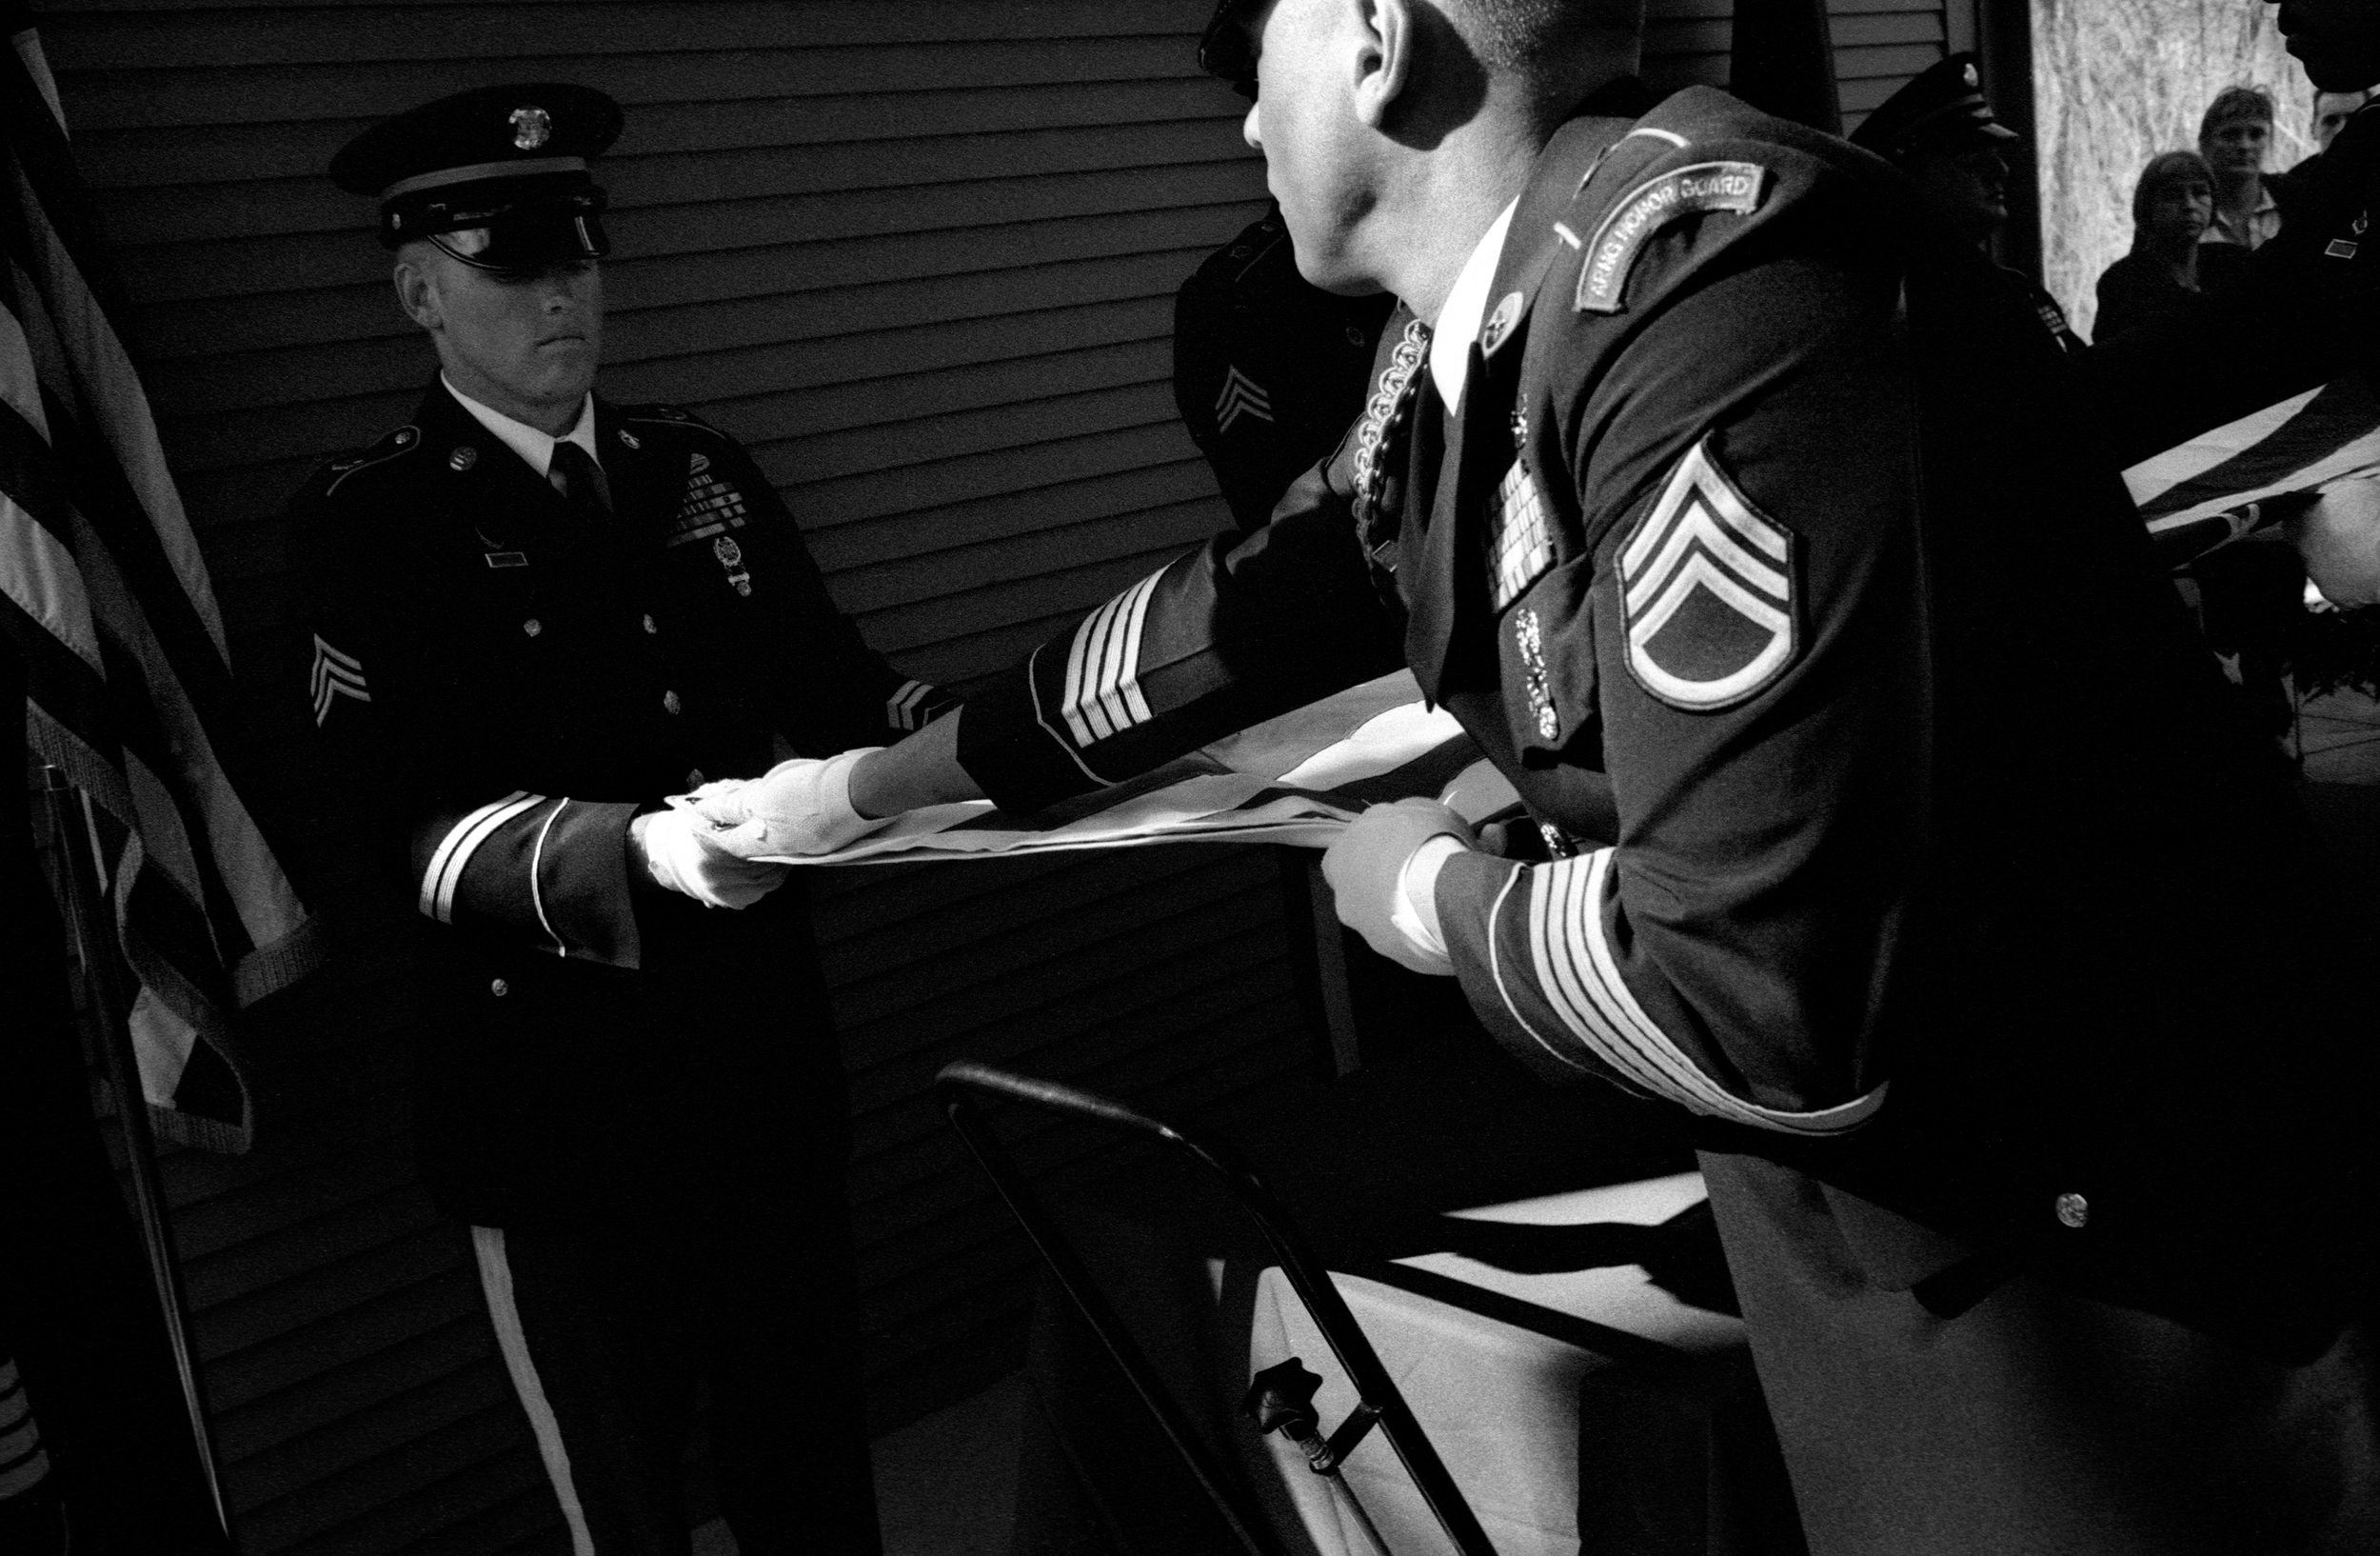  National Guard soldiers fold a flag at the funeral of SPC Dirk Terpstra who committed suicide shortly after returning home from Afghanistan; Ft. Custer National Cemetery,&nbsp;Augusta, Michigan, 2010. The night of his death, Terpstra visited a bar w